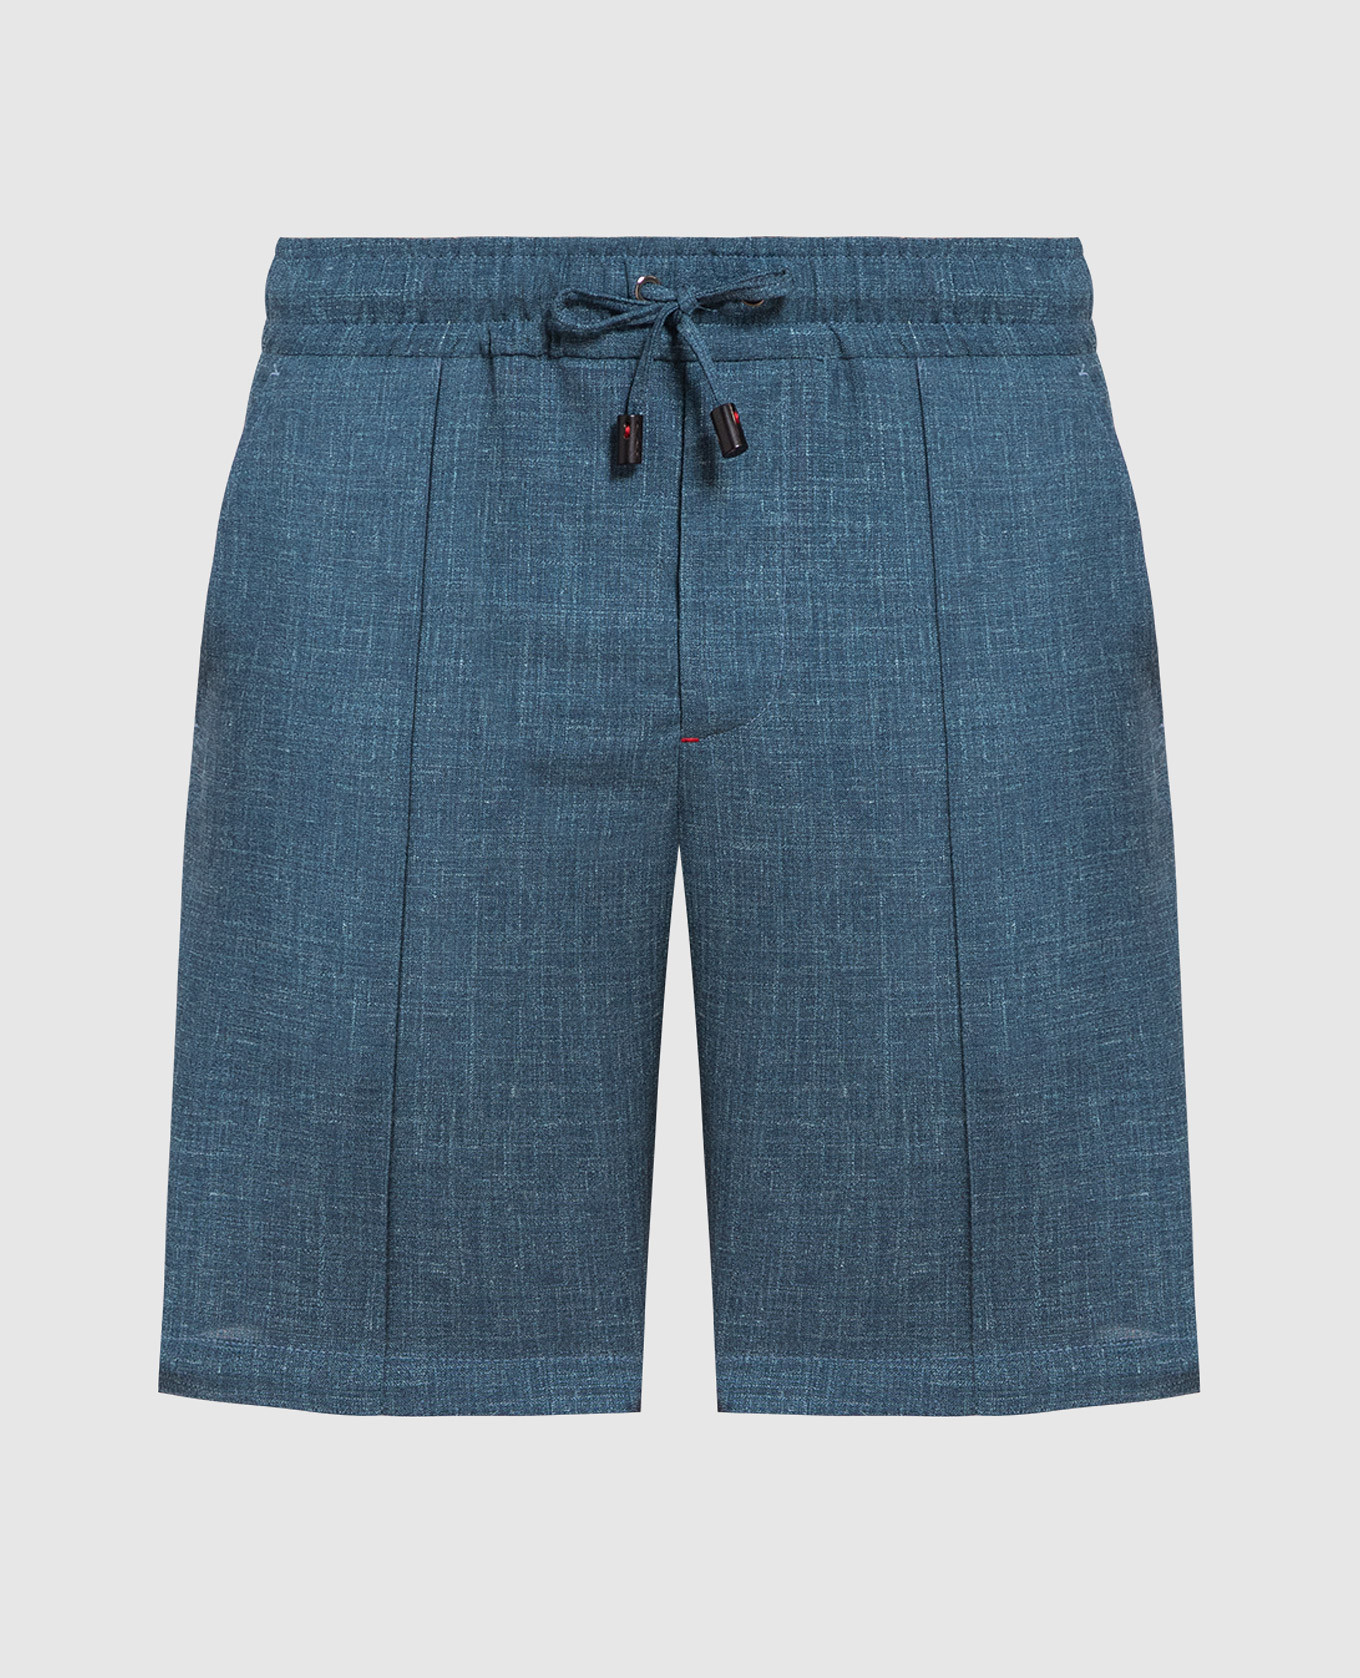 Blue shorts made of wool, silk and linen